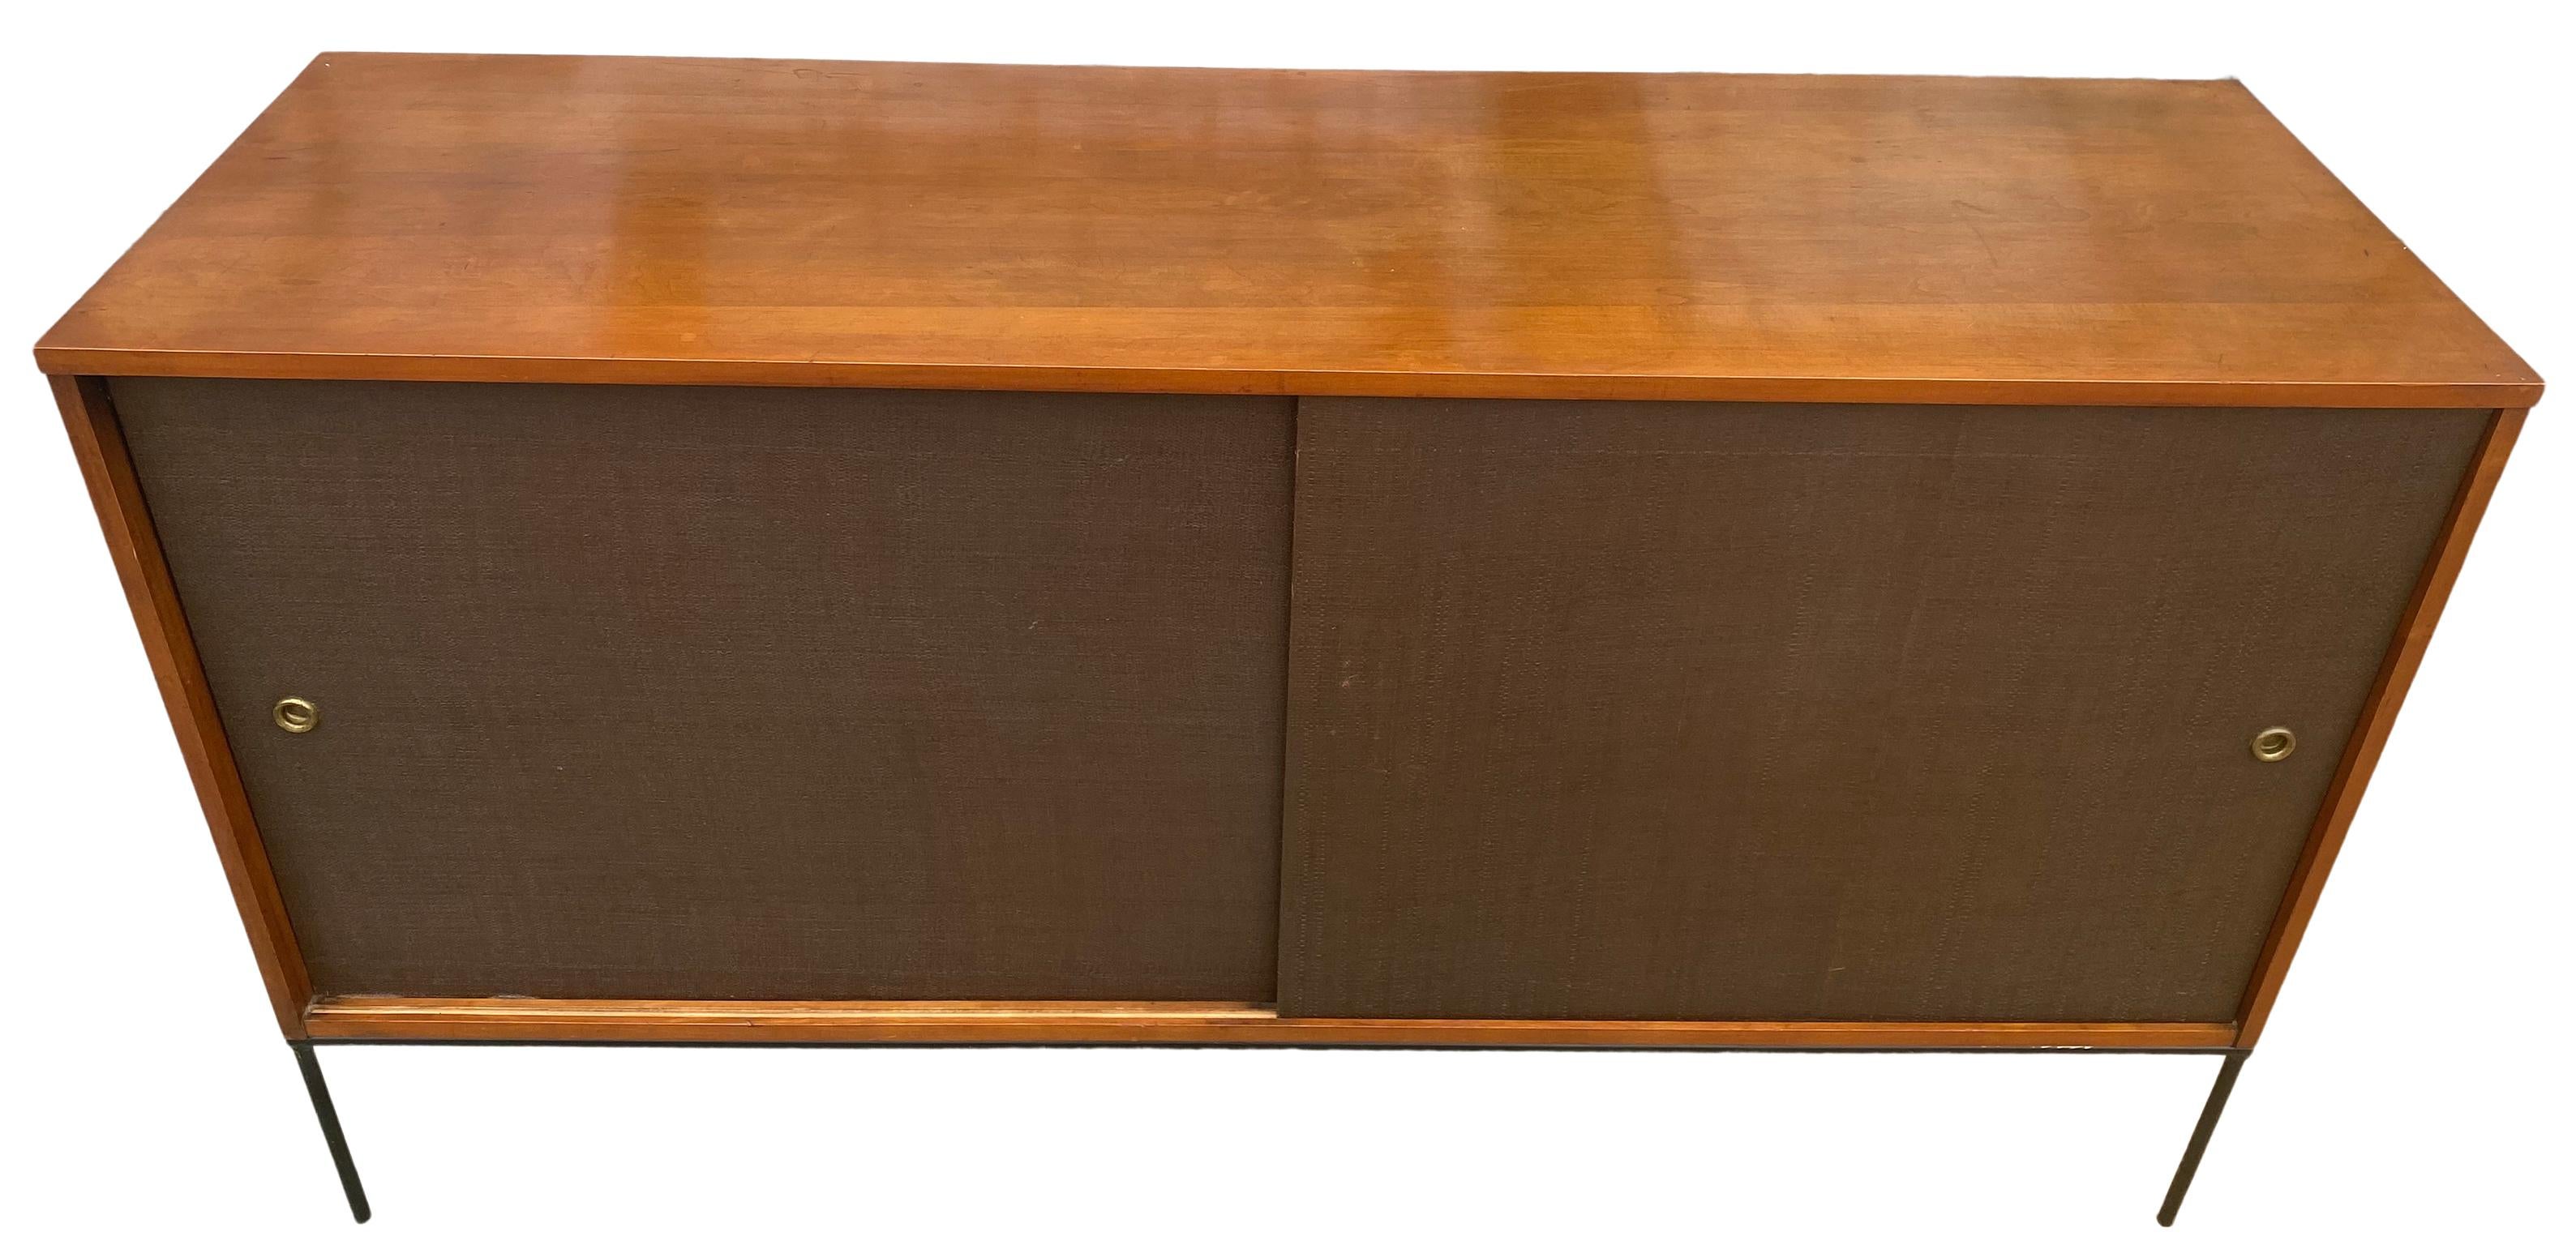 Beautiful midcentury tall credenza by Paul McCobb circa 1950 Planner Group #1514 has 1 adjustable shelves with pins with 1 drawer on the left side and 3 drawers on the right side. Solid maple construction with an original medium Walnut finish. All